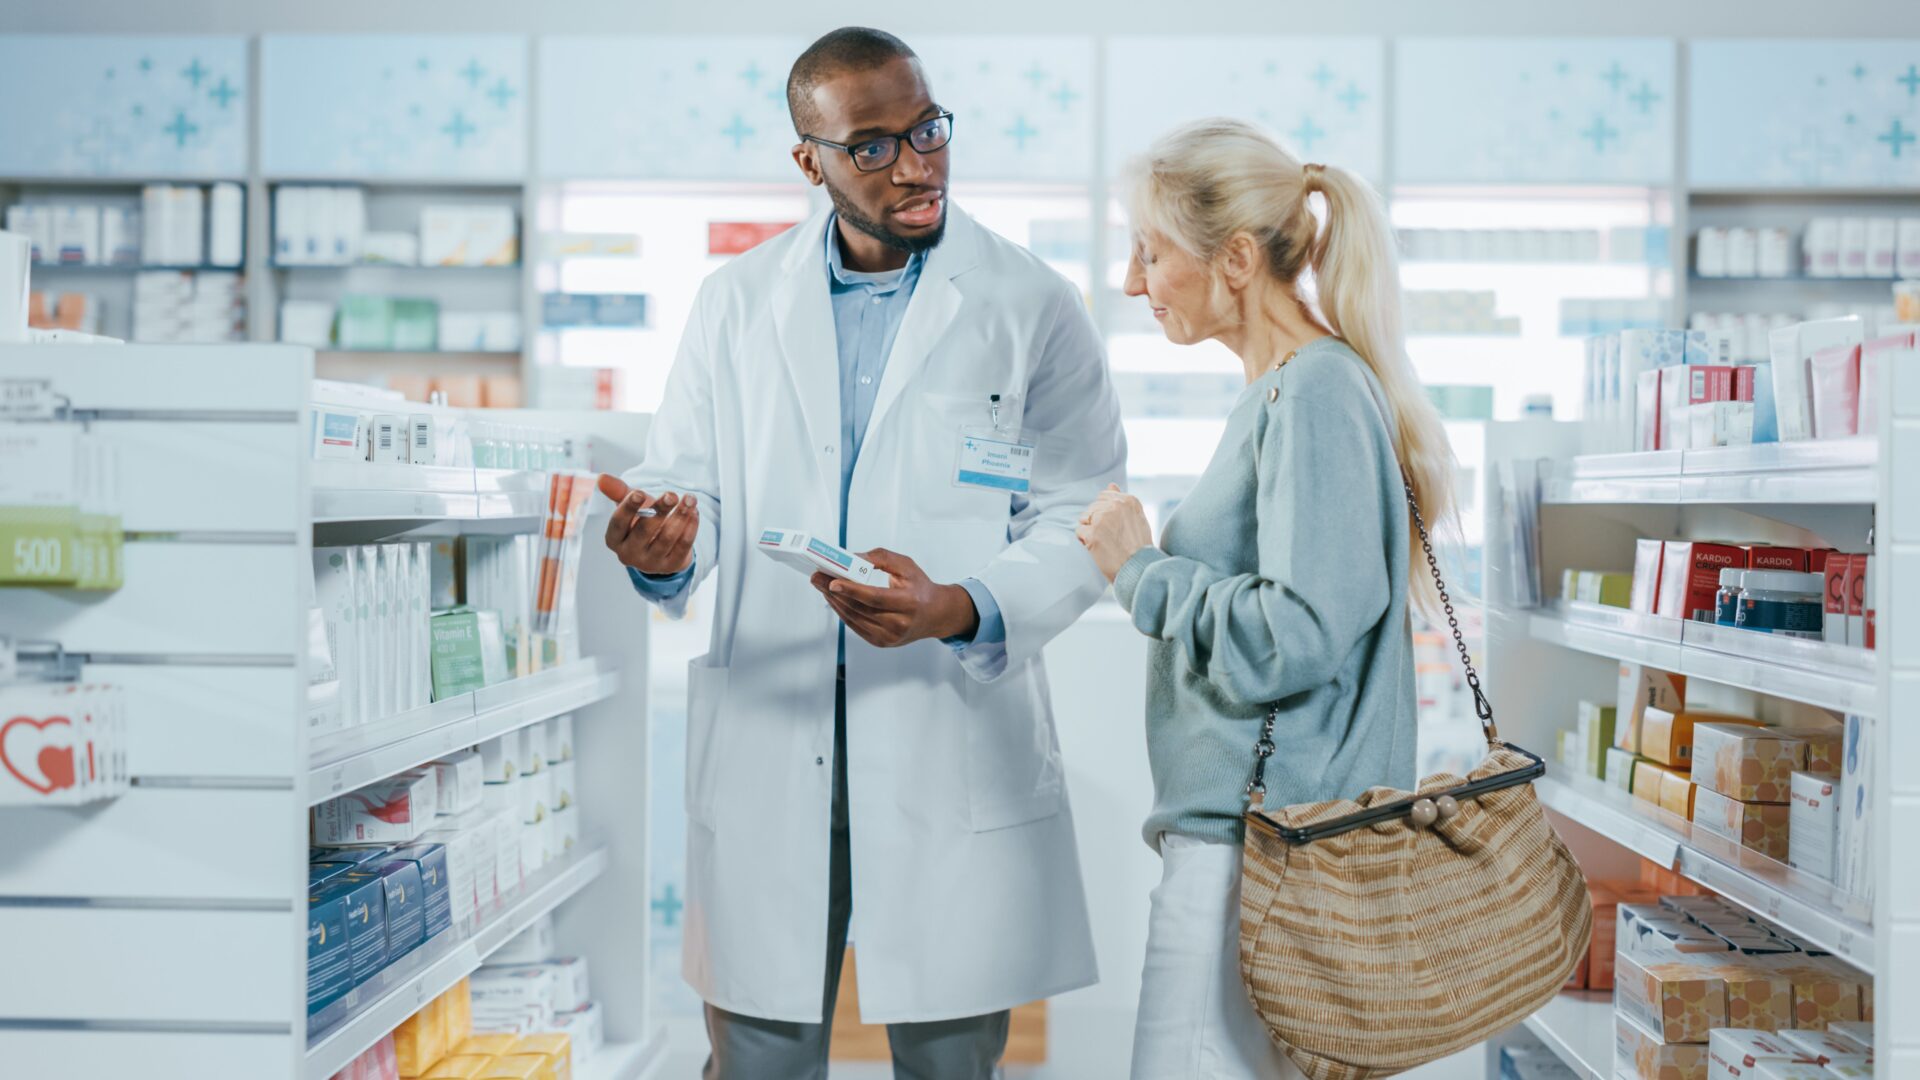 Pharmacy: Professional Black Helpful Pharmacist Advising Caucasian Senior Female Customer with Medicine Recommendation, Talking. Cusotmer Support in Drugstore Full of Drugs, Pill, Health Care Products